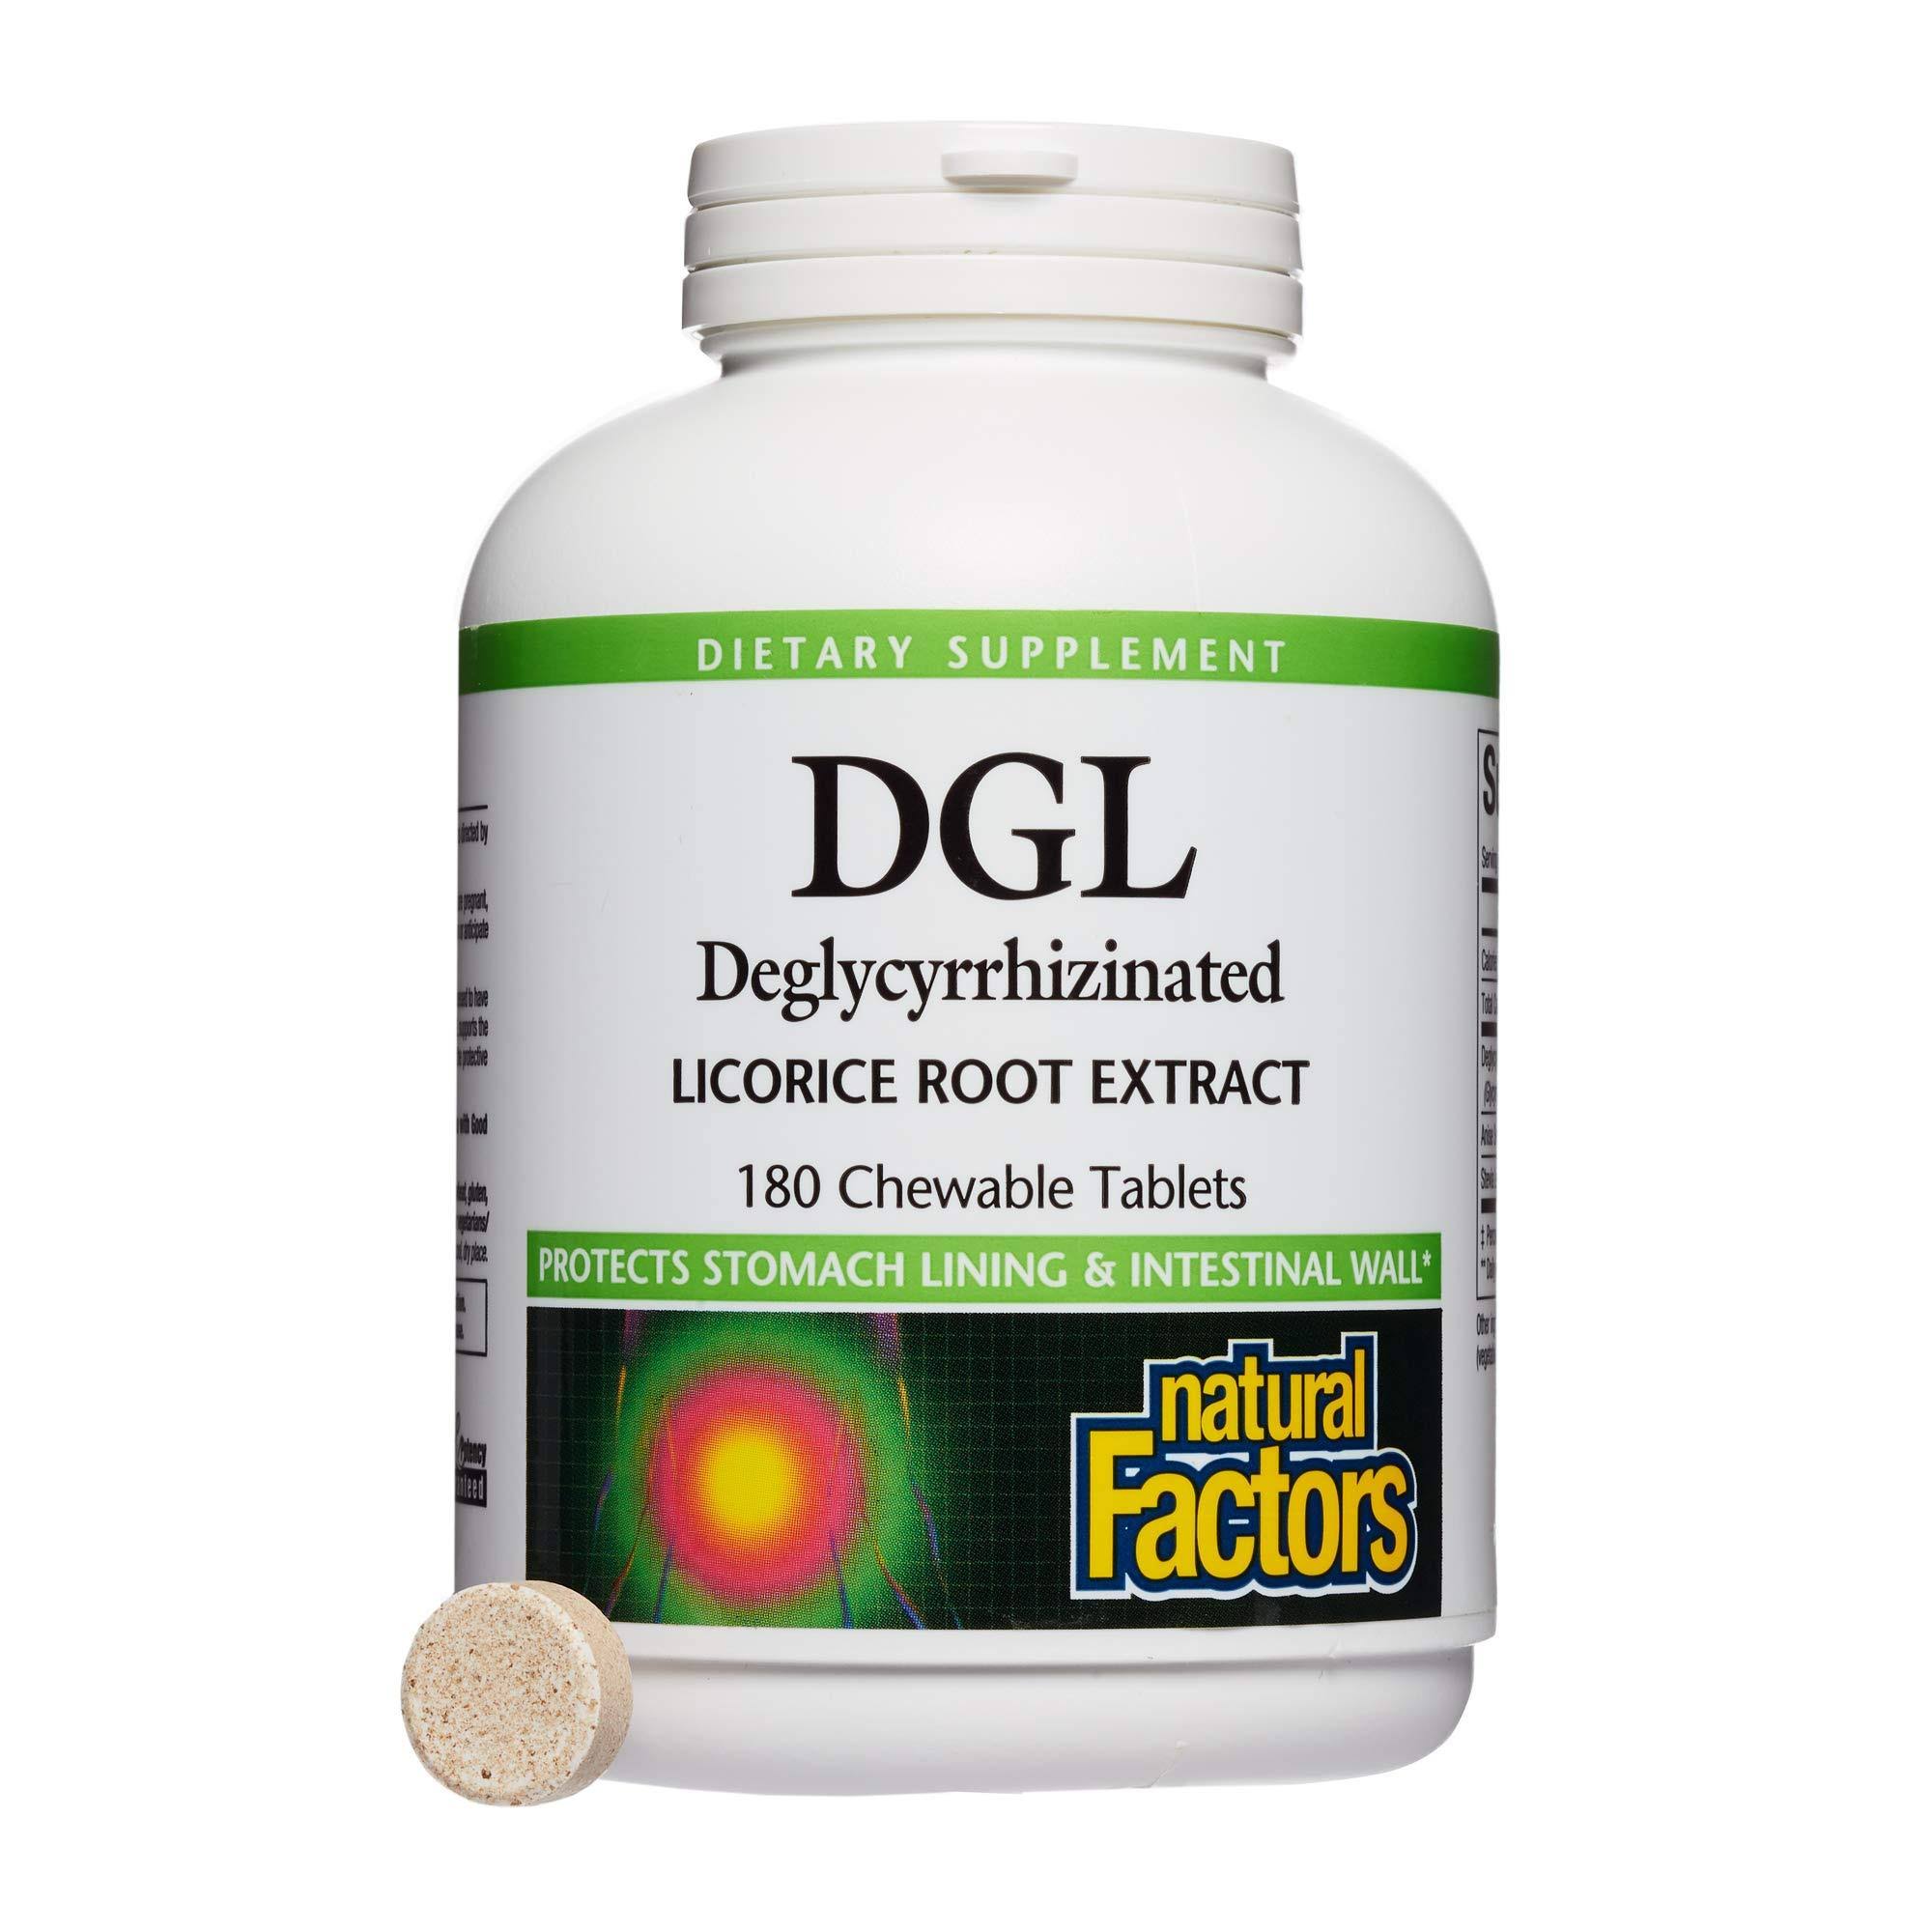 Natural Factors DGL Licorice Root Extract - 180 Chewable Tablets